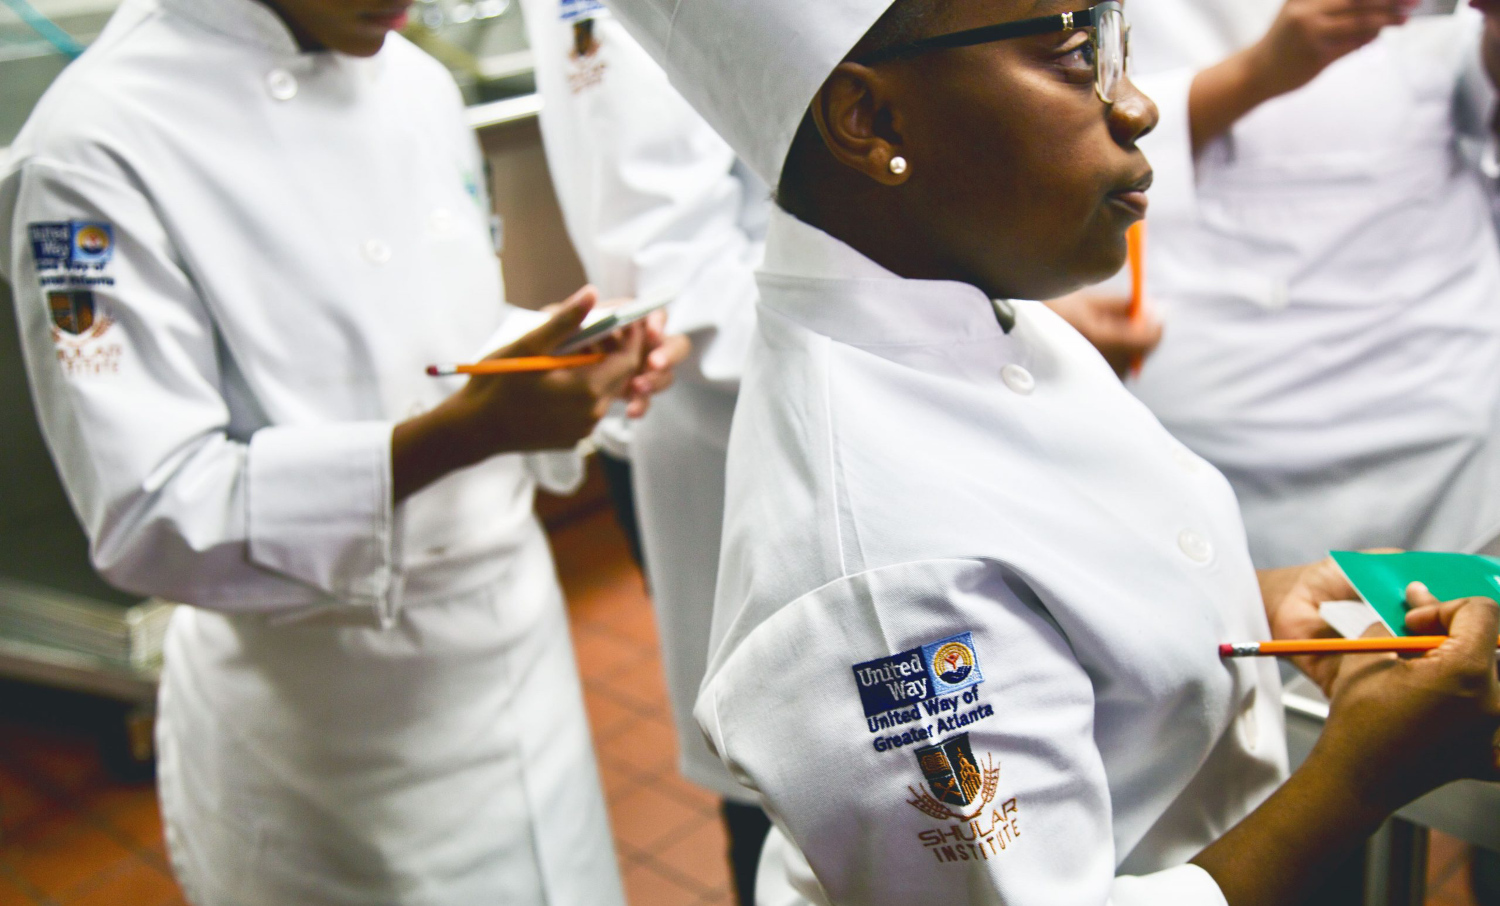 Based in Tucker, Georgia, the Shular Institute is a culinary education institution aiming to prepare aspiring chefs for the modern culinary and hospitality industries.